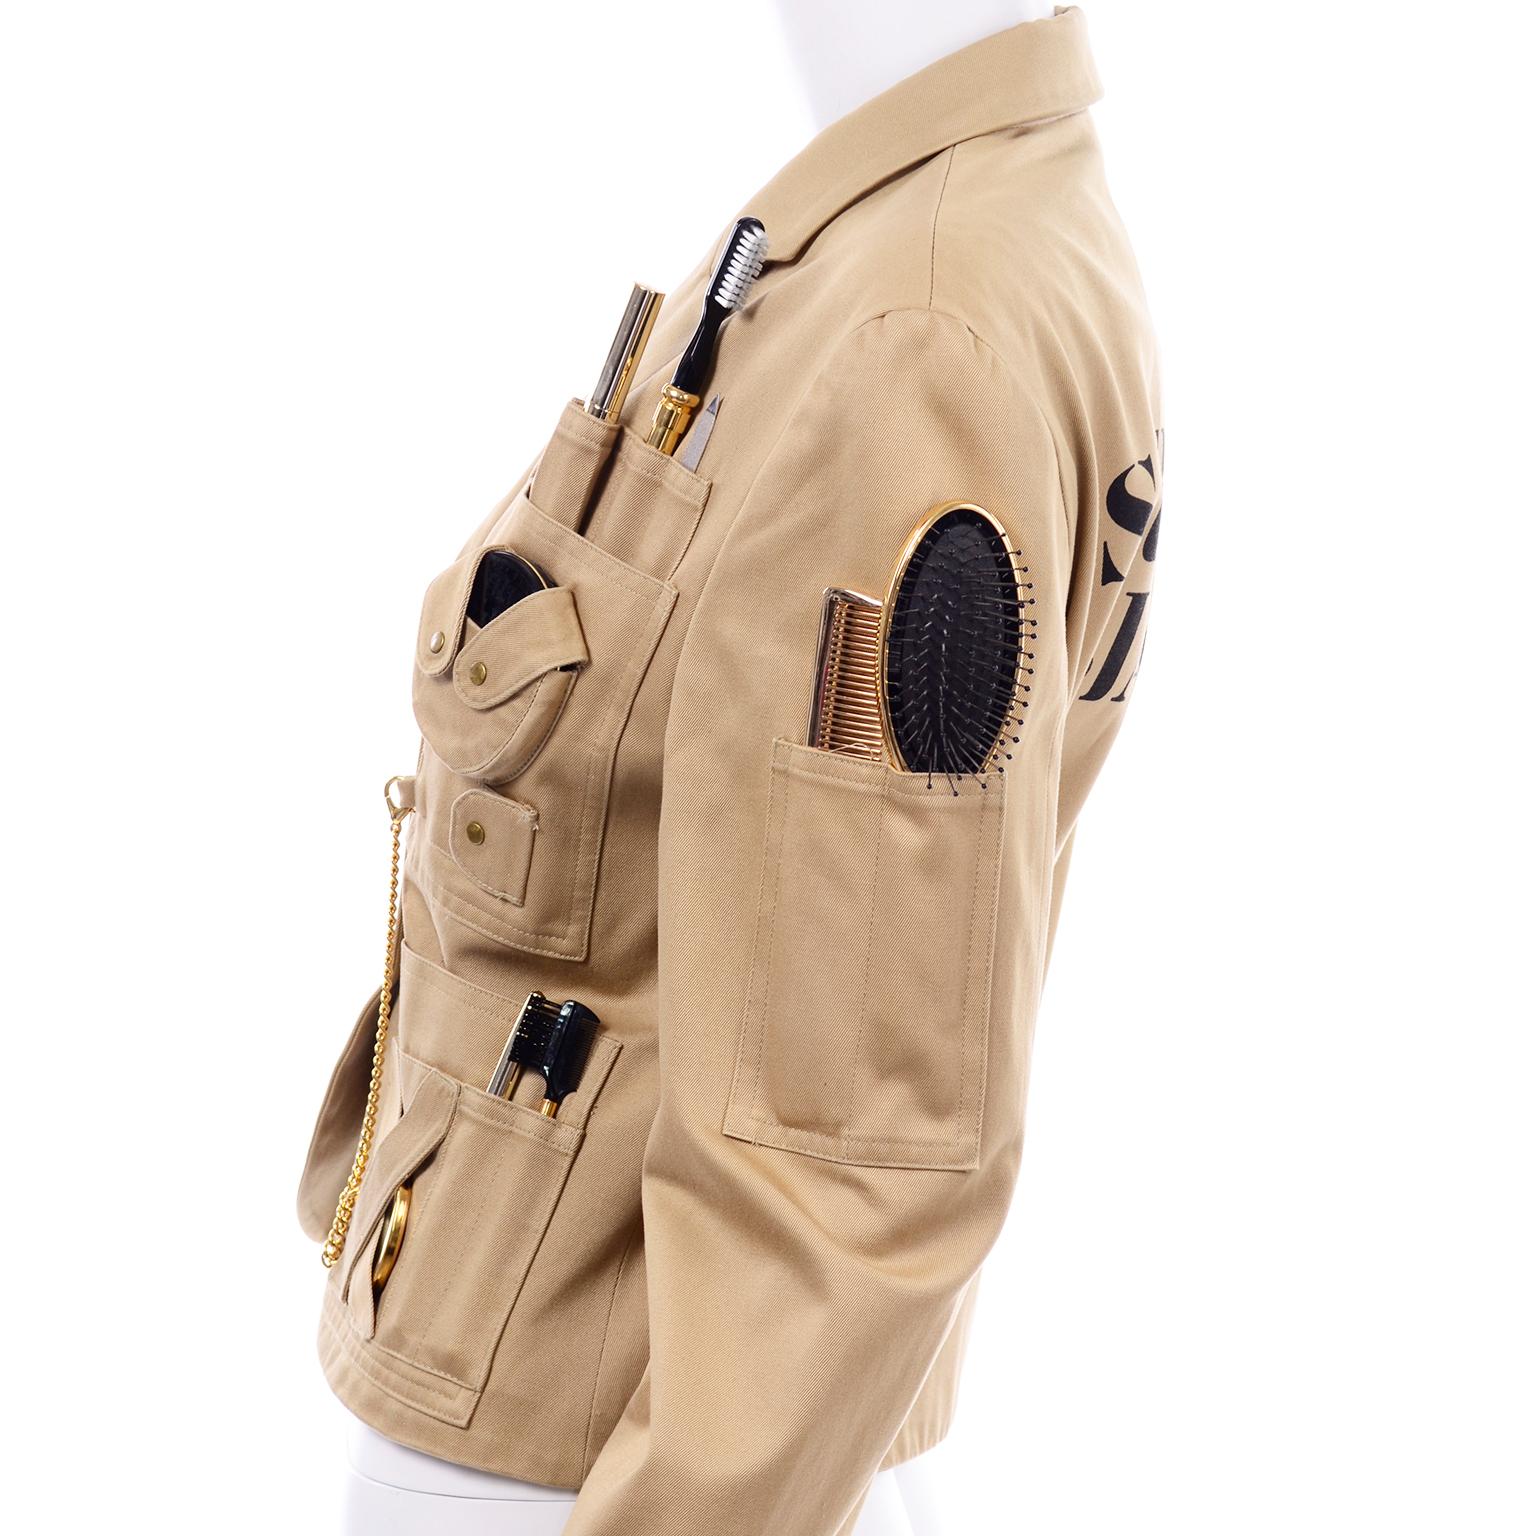 1991 Franco Moschino Couture Survival Jacke in Khaki Baumwolle Urban Jungle Tools 10